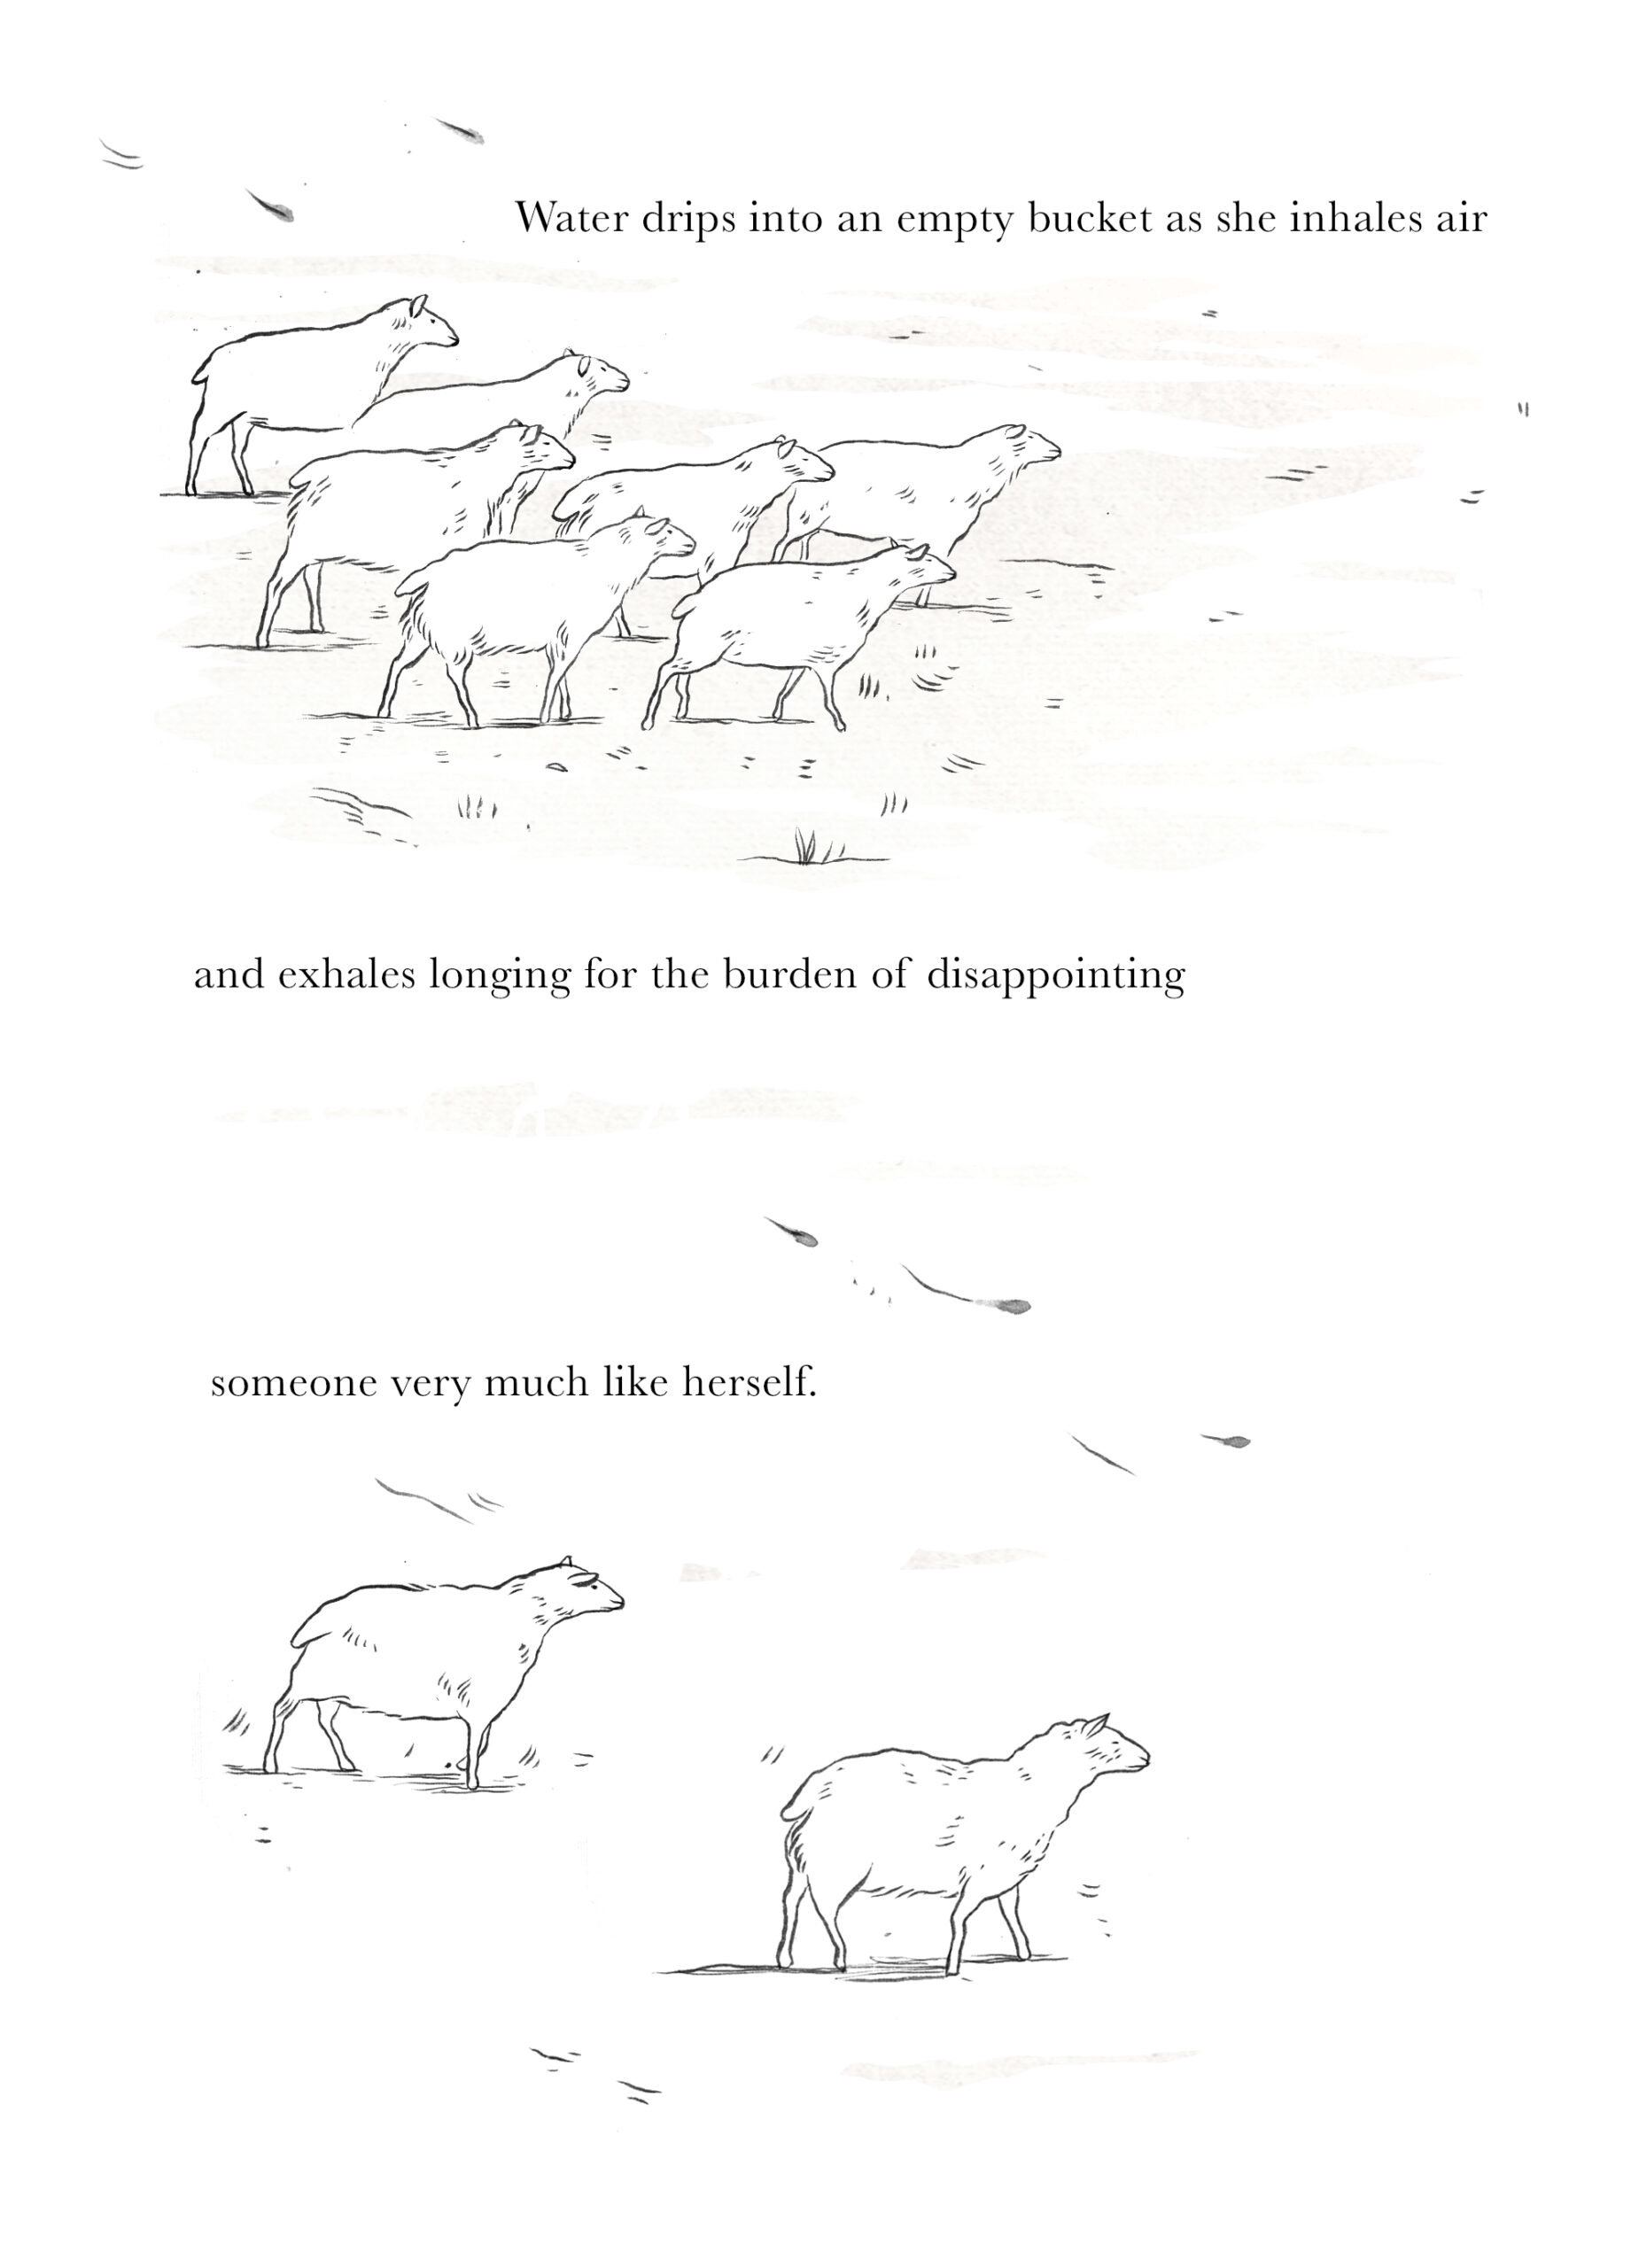 The flock appear at a distance, moving as one and fighting the wind. In the subsequent image, only two sheep move, distantly from each other, in the same direction. Text reads: Water drips into an empty bucket as he inhales air / and exhales longing for the burden of disappointing / someone very much like herself.